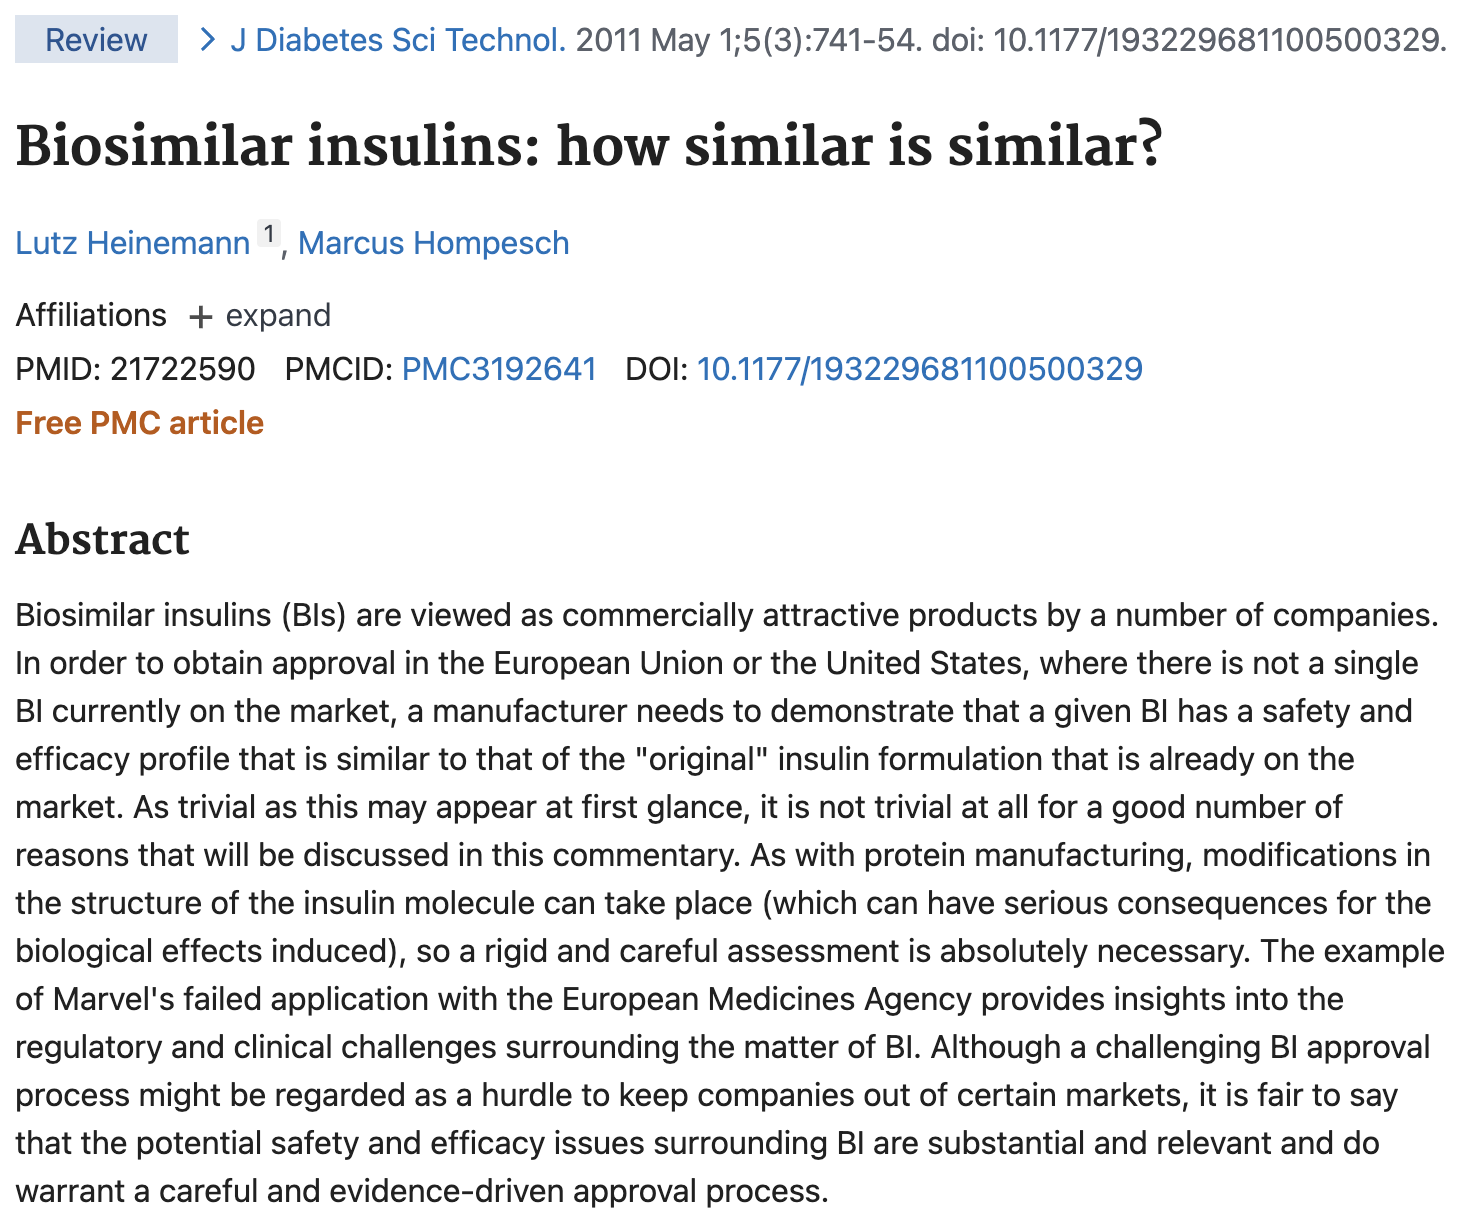 Clinical Research Considerations for Biosimilar Insulins thumbnail